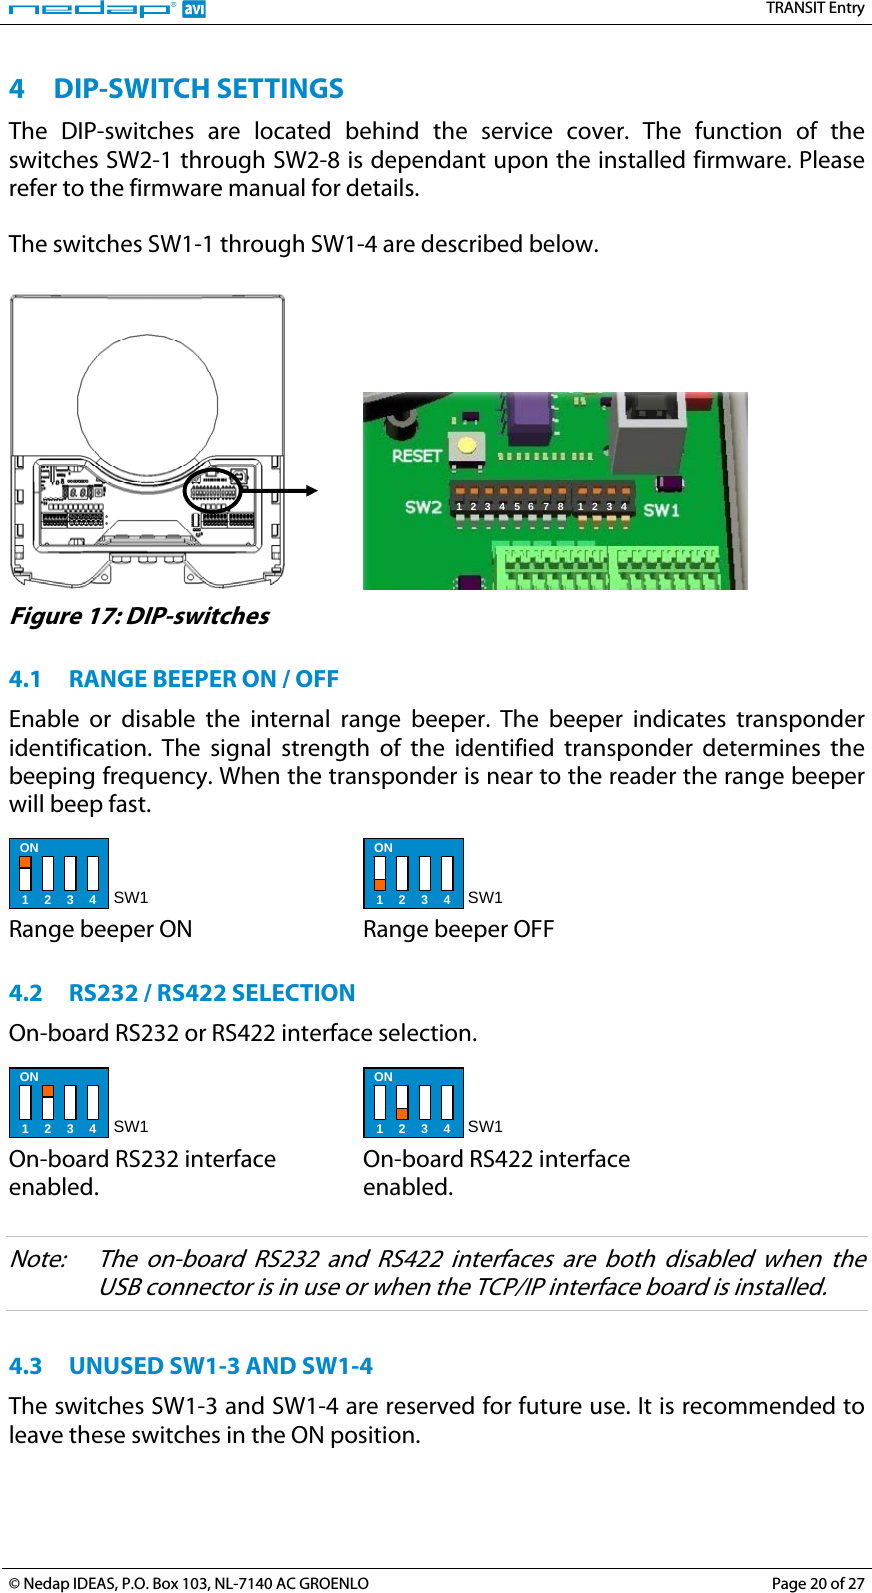   TRANSIT Entry 4 DIP-SWITCH SETTINGS The DIP-switches are located behind the service cover. The function of the switches SW2-1 through SW2-8 is dependant upon the installed firmware. Please refer to the firmware manual for details.  The switches SW1-1 through SW1-4 are described below.     1 2 3 4 5 6 7 8  1 2 3 4  Figure 17: DIP-switches  4.1 RANGE BEEPER ON / OFF Enable or disable the internal range beeper. The beeper indicates transponder identification. The signal strength of the identified transponder determines the beeping frequency. When the transponder is near to the reader the range beeper will beep fast.  ON 1 2 3 4 SW1  Range beeper ON  ON 1 2 3 4 SW1 Range beeper OFF  4.2 RS232 / RS422 SELECTION On-board RS232 or RS422 interface selection.  ON 1 2 3 4 SW1  On-board RS232 interface enabled.  ON 1 2 3 4 SW1 On-board RS422 interface enabled.  Note:  The on-board RS232 and RS422 interfaces are both disabled when the USB connector is in use or when the TCP/IP interface board is installed.  4.3 UNUSED SW1-3 AND SW1-4 The switches SW1-3 and SW1-4 are reserved for future use. It is recommended to leave these switches in the ON position.  © Nedap IDEAS, P.O. Box 103, NL-7140 AC GROENLO  Page 20 of 27 